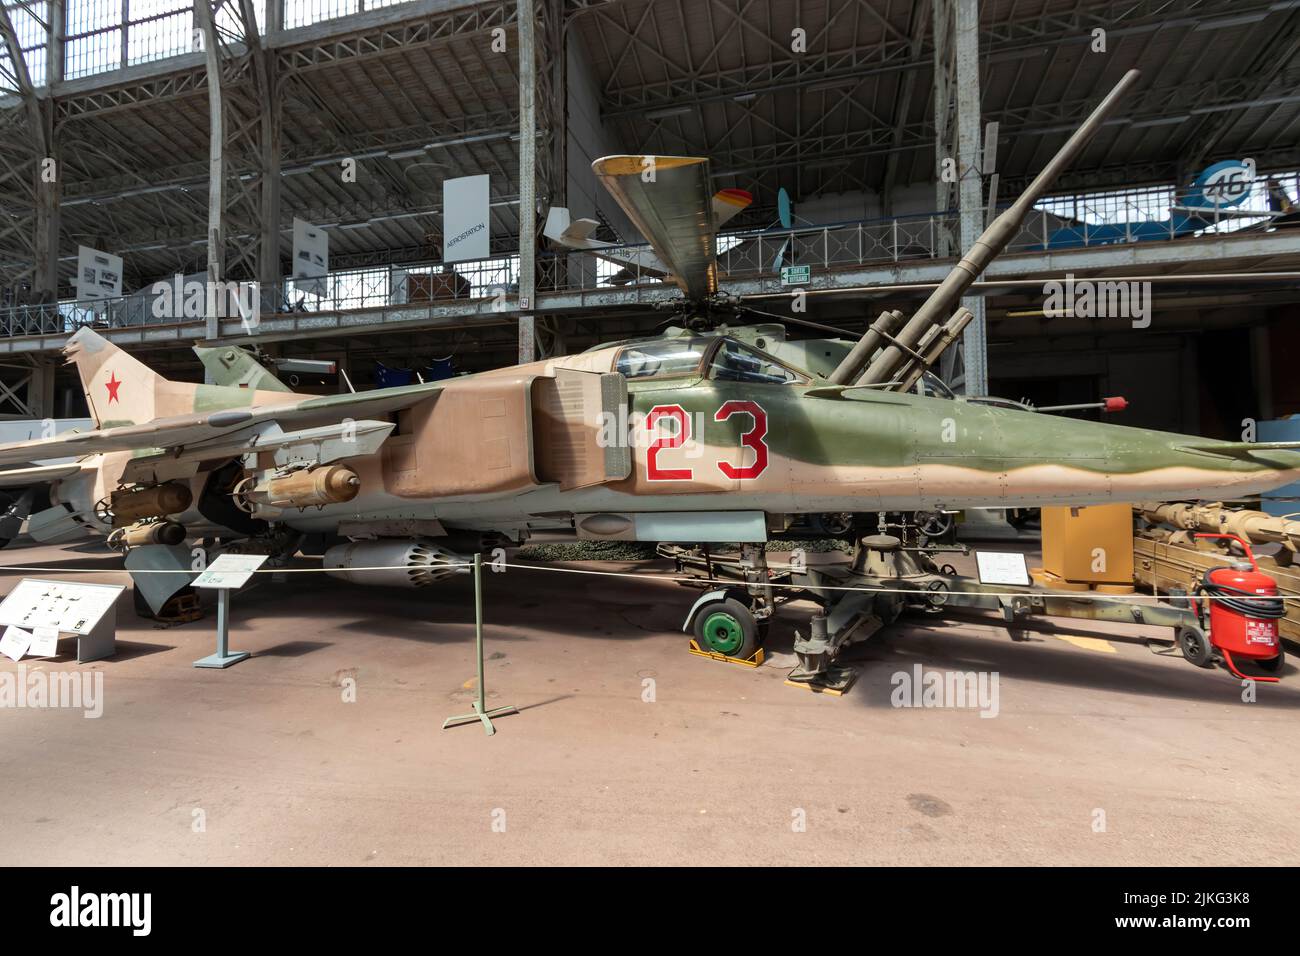 Brussels, Belgium - July 17, 2018: A Soviet Mikoyan-Gurevich MiG-23 Flogger fighter aircraft in the Royal Museum of the Armed Forces Stock Photo